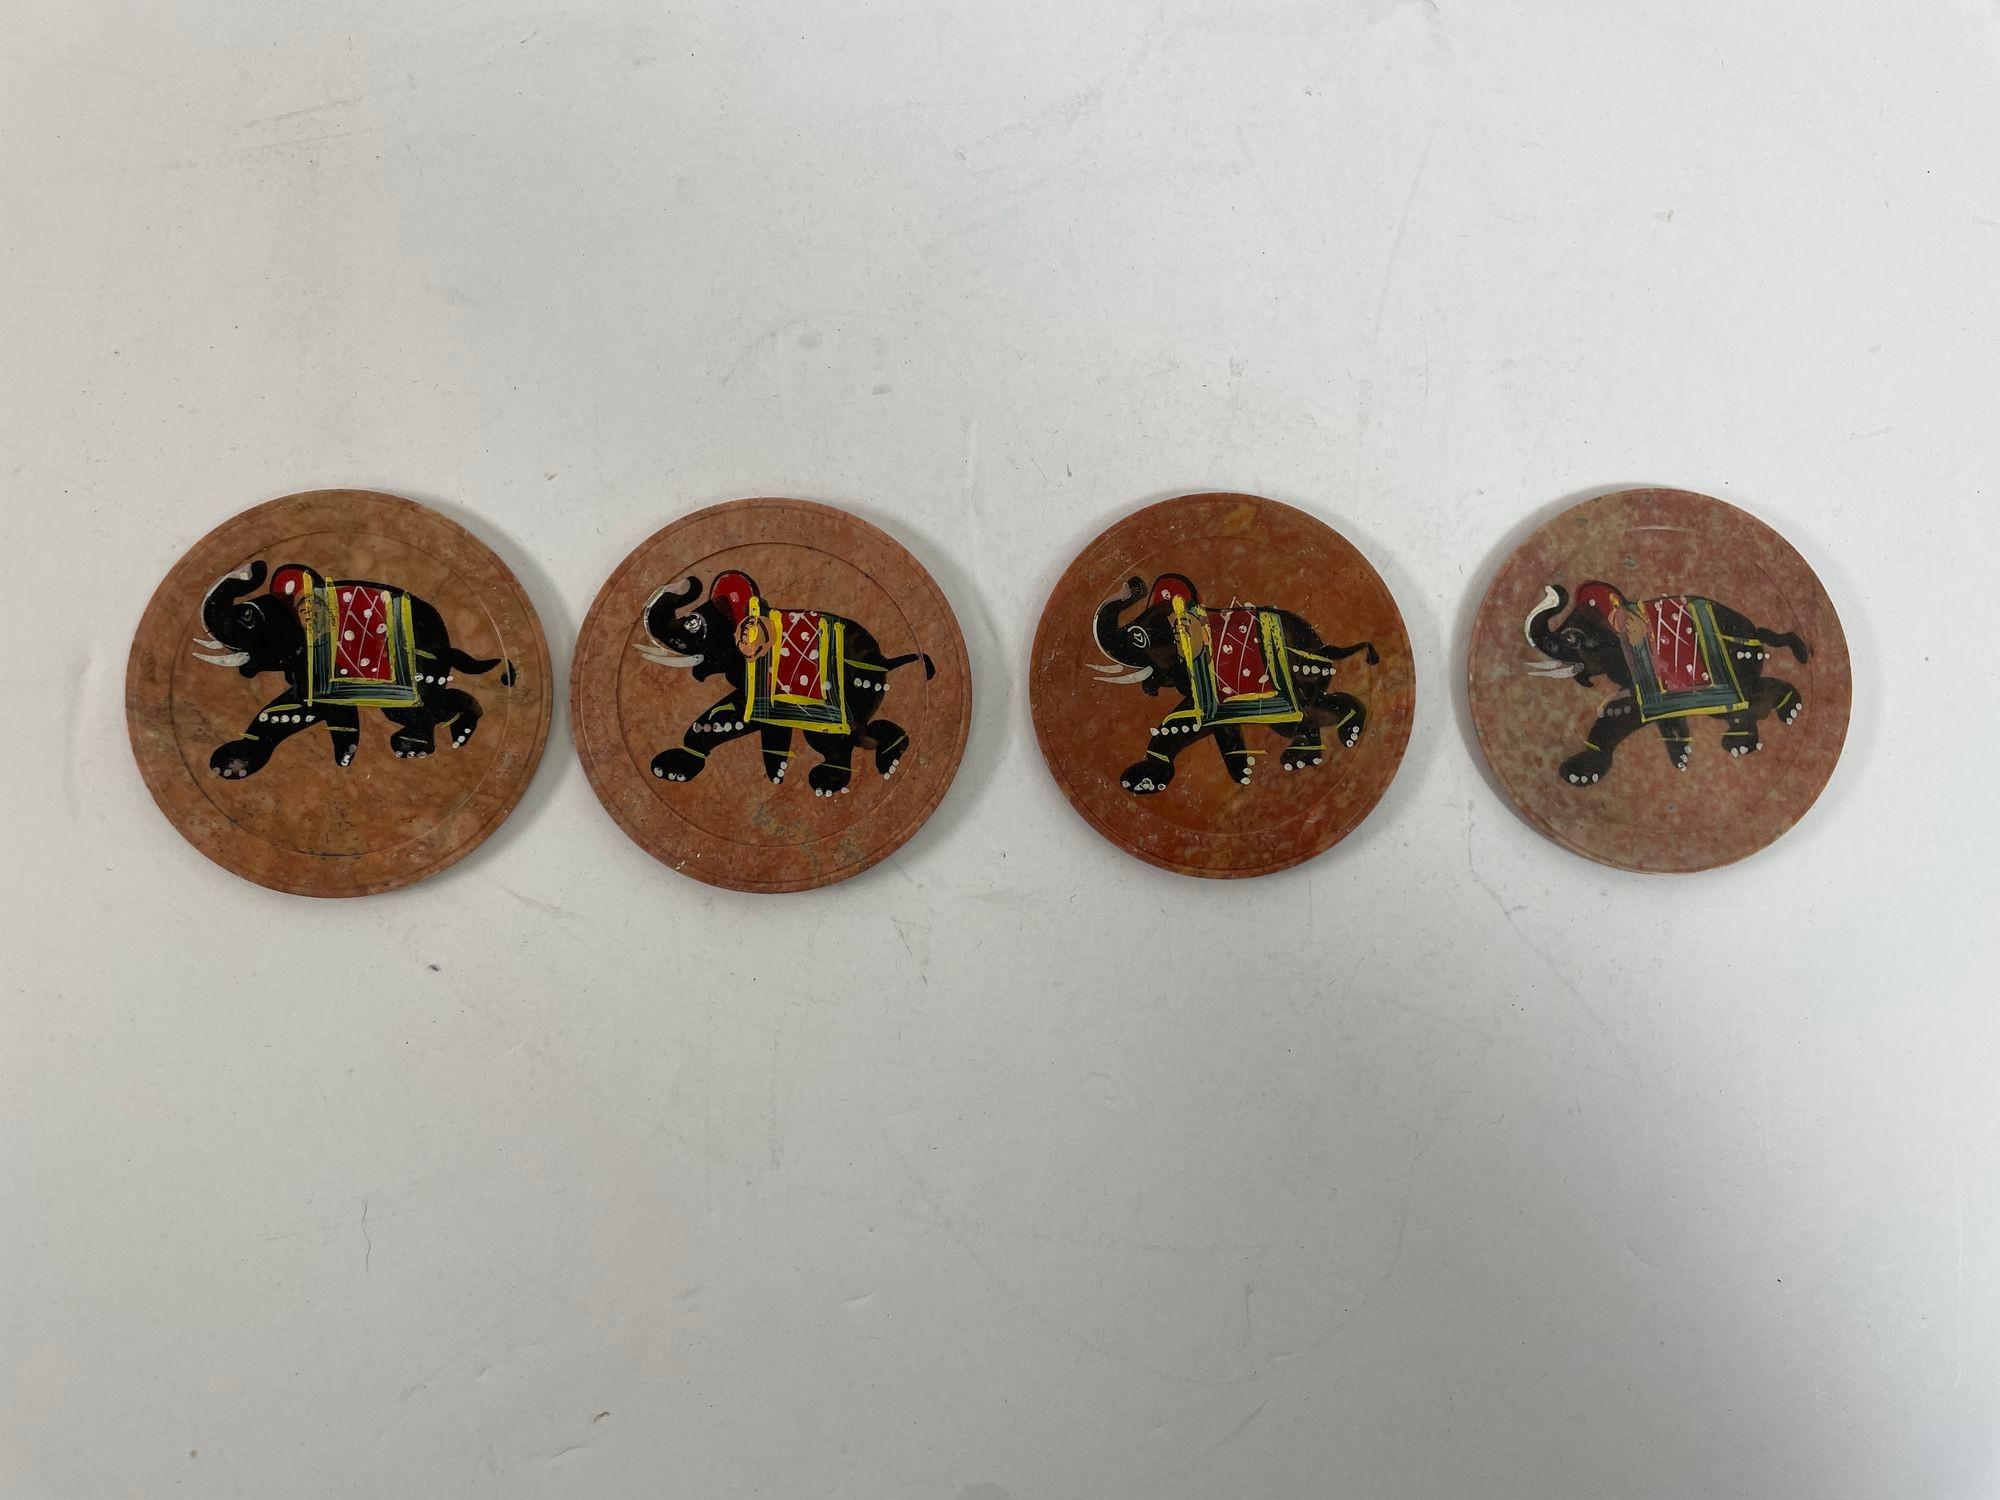 Vintage Rajasthani brown marble stone hand painted with elephants India style coasters.
Rajasthani marble decorative set of 4 small round coasters.
Beautiful handcrafted coasters in marble with elephants design.
Taj Mahal style.
Very nice fine